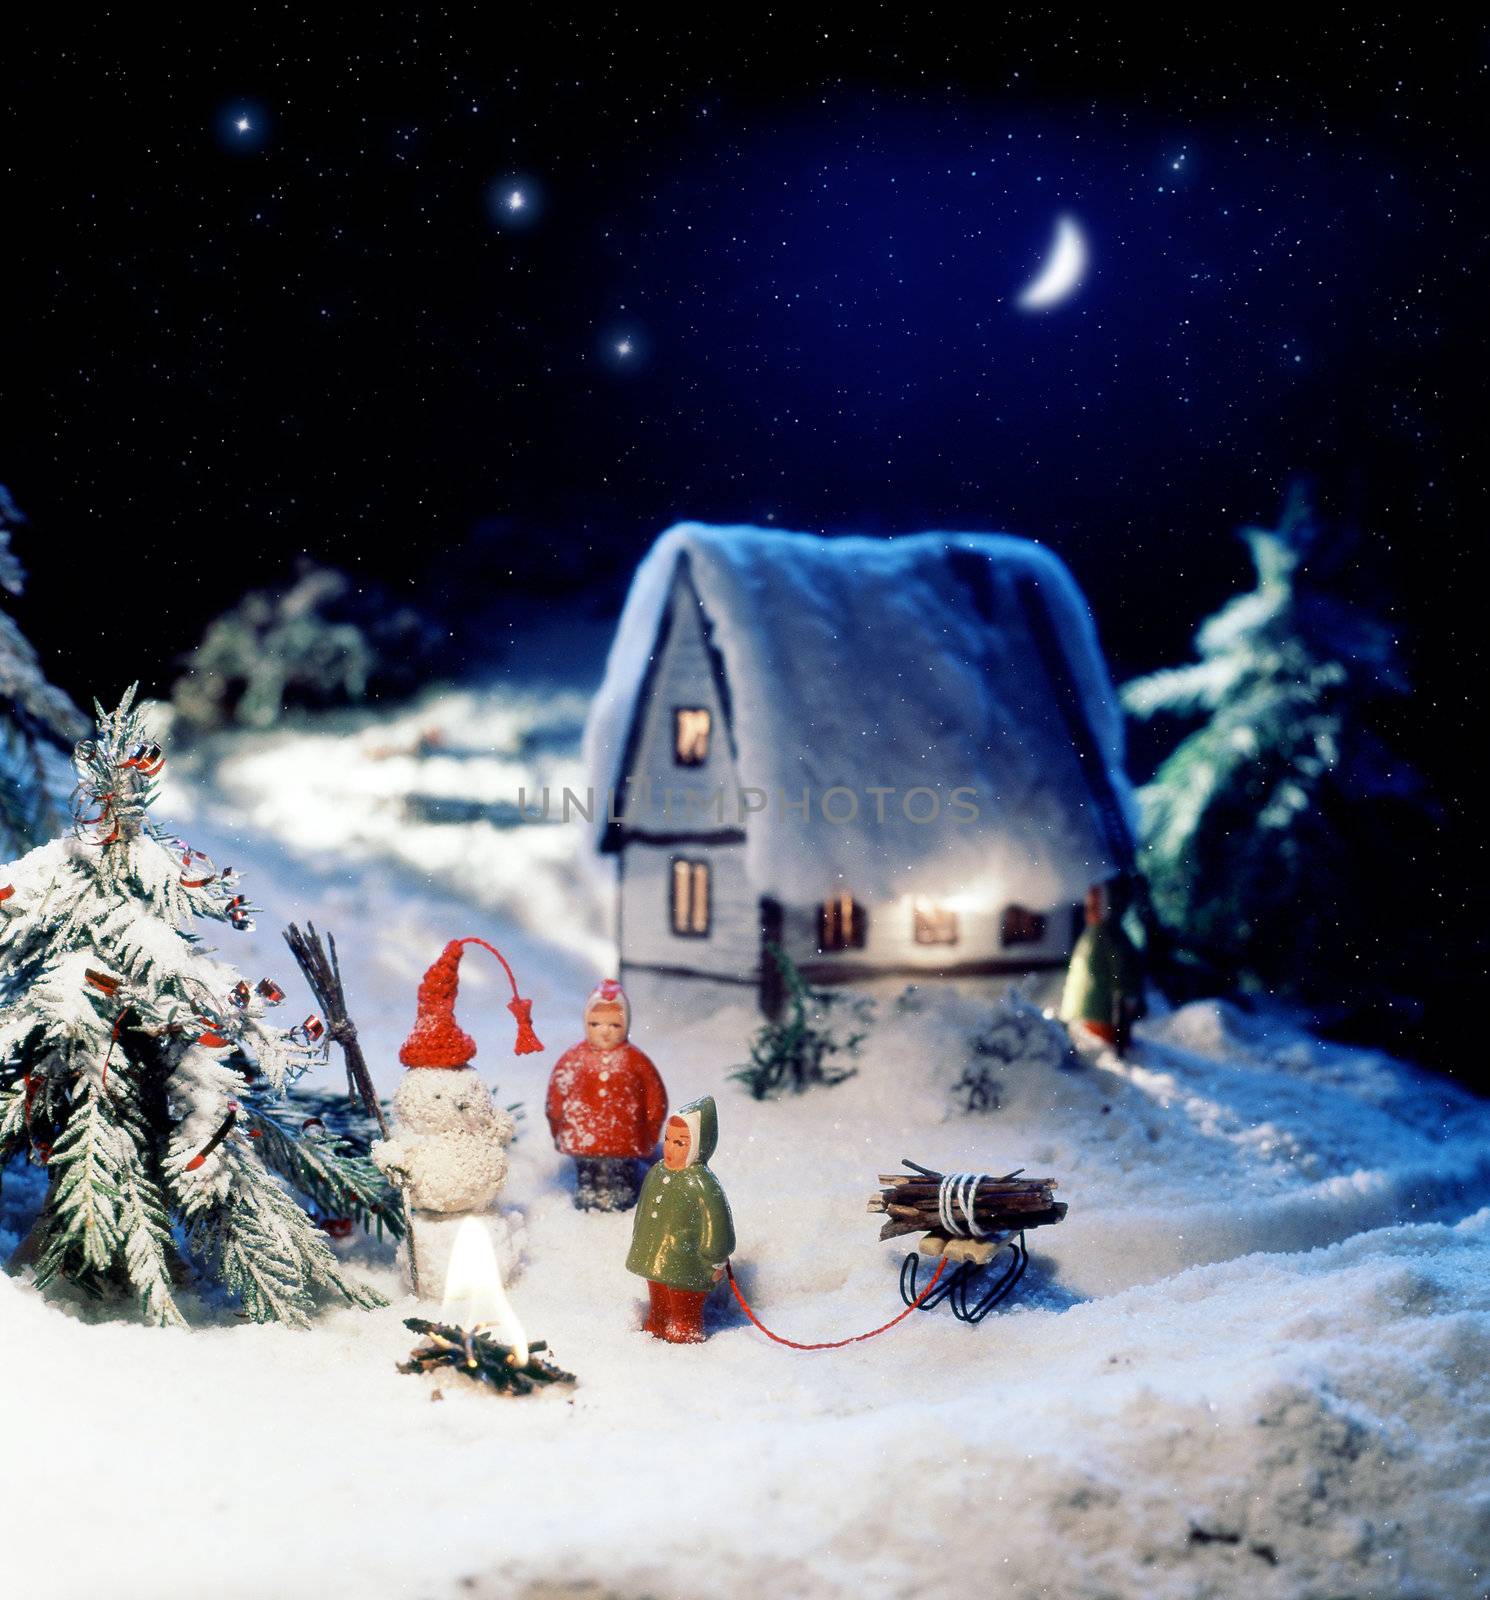 Photo miniature about new year holiday with snowman and childrens